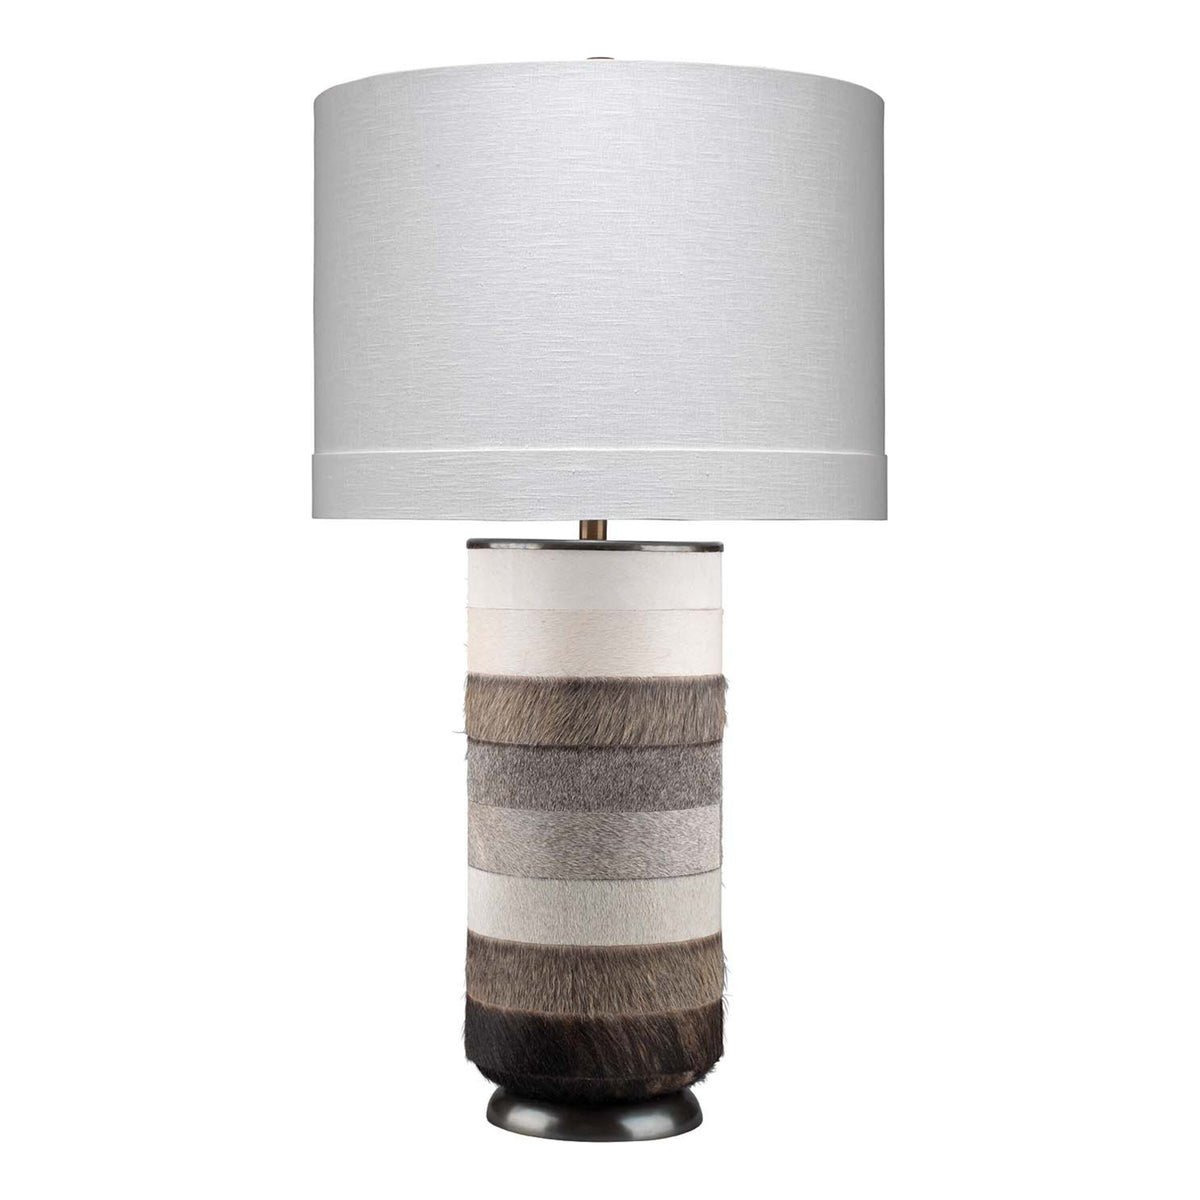 Jamie Young Company - 1WINS-TLHI - Winslow Table Lamp - Winslow - Multi Tone Grey and White